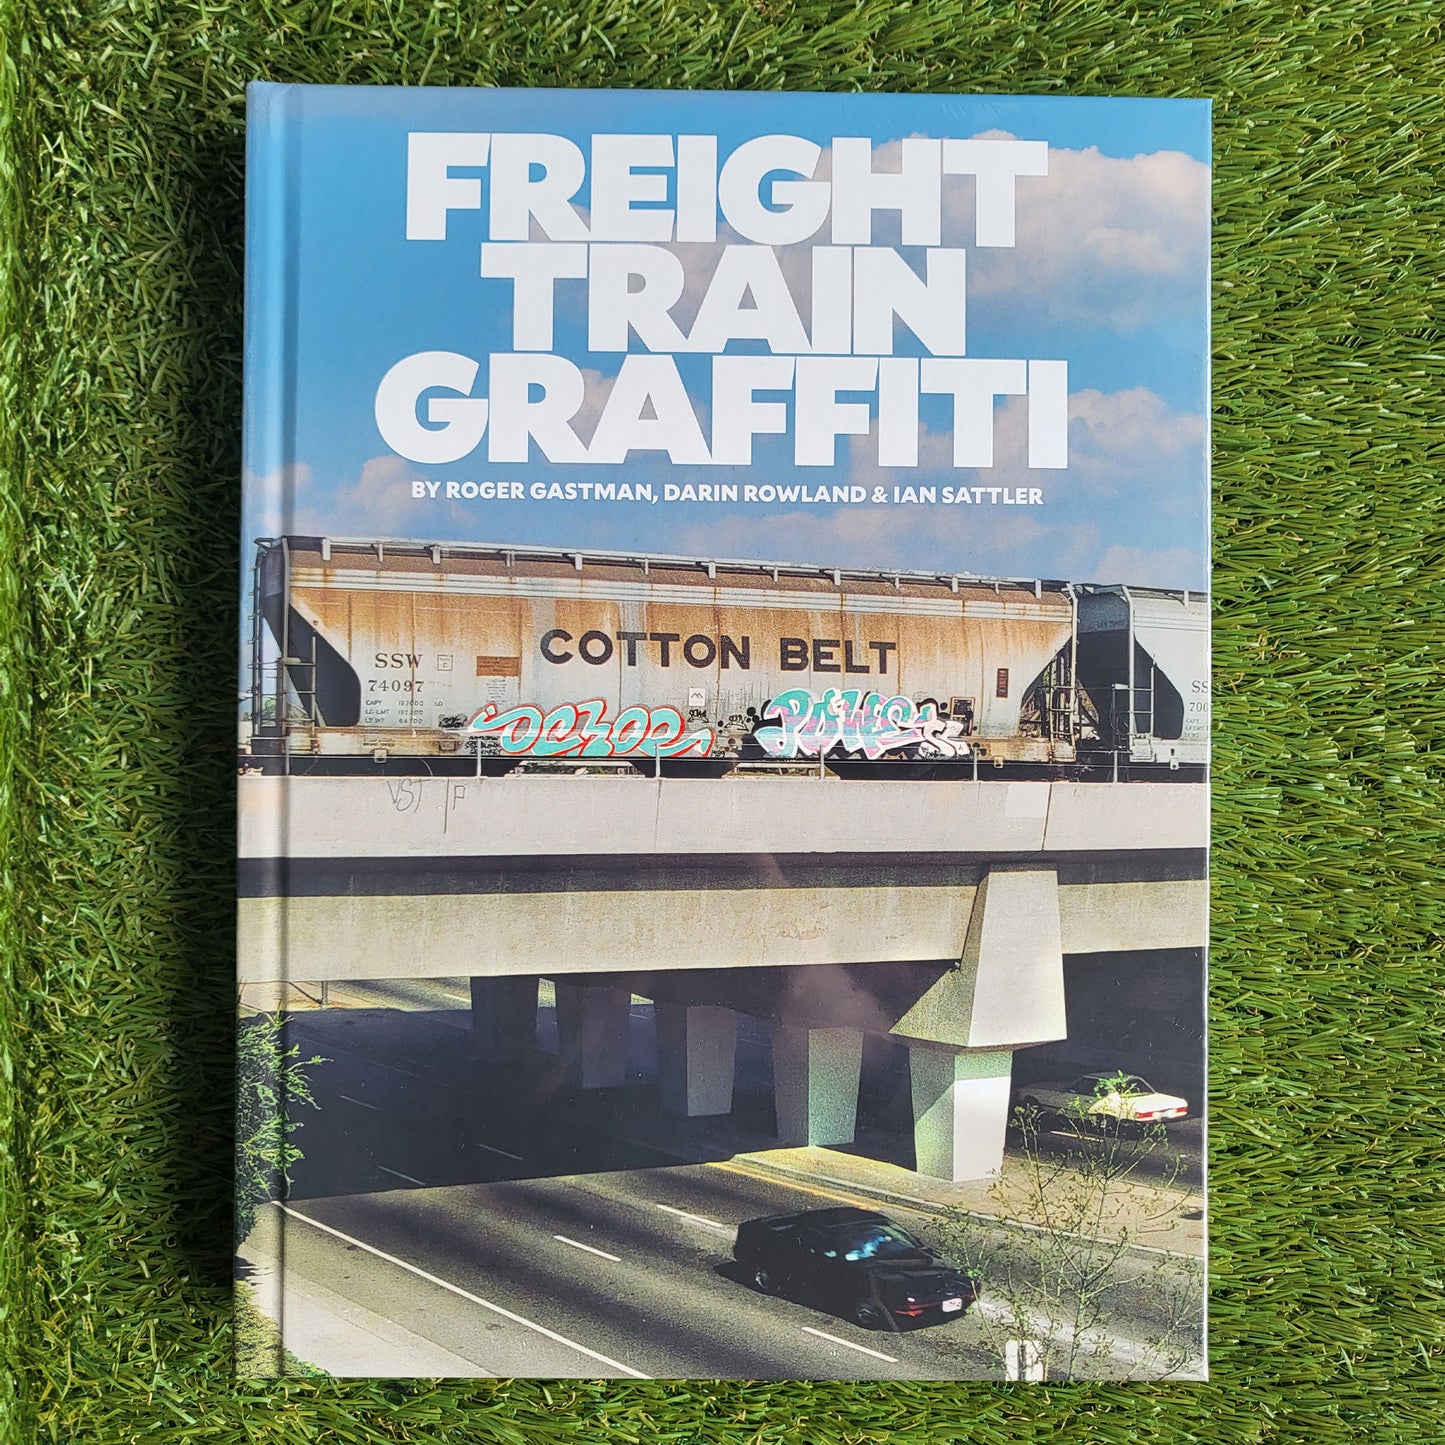 Hardcover book reading 'Freight Train Graffiti' with a photo of a cargo train on a railroad overpass over a freeway with a grass background